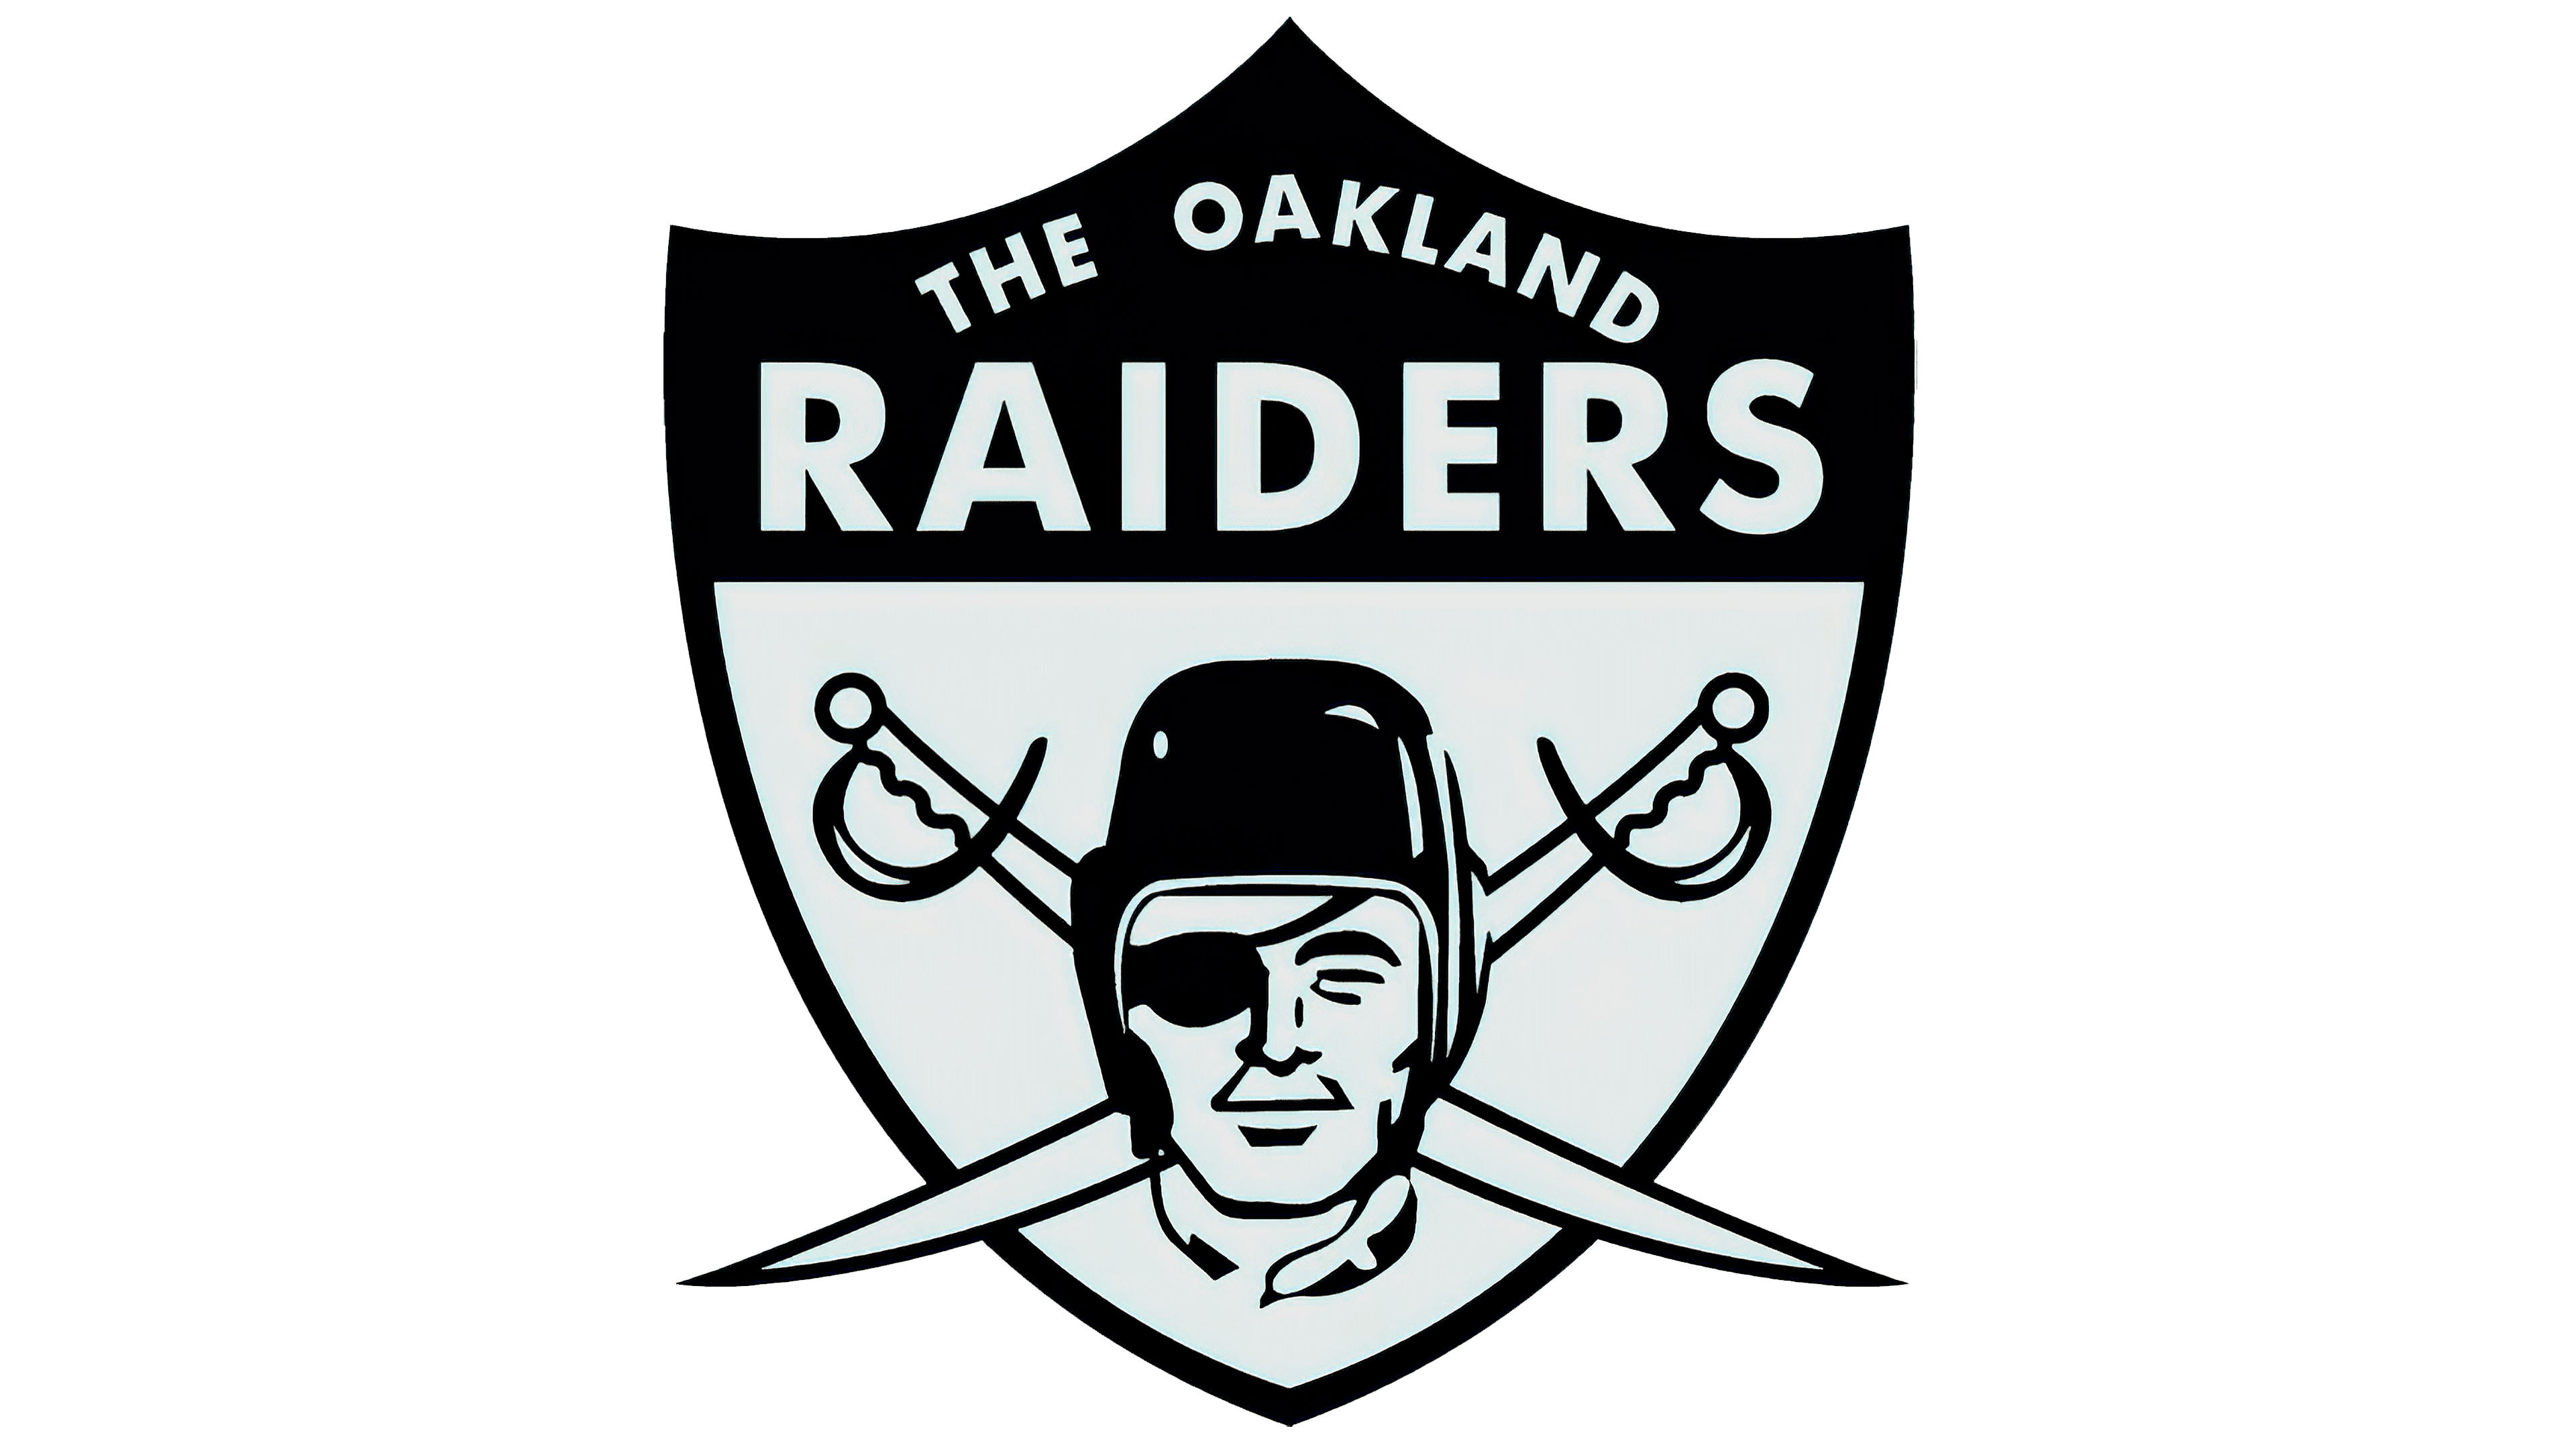 The 1963 Raiders logo featured... 